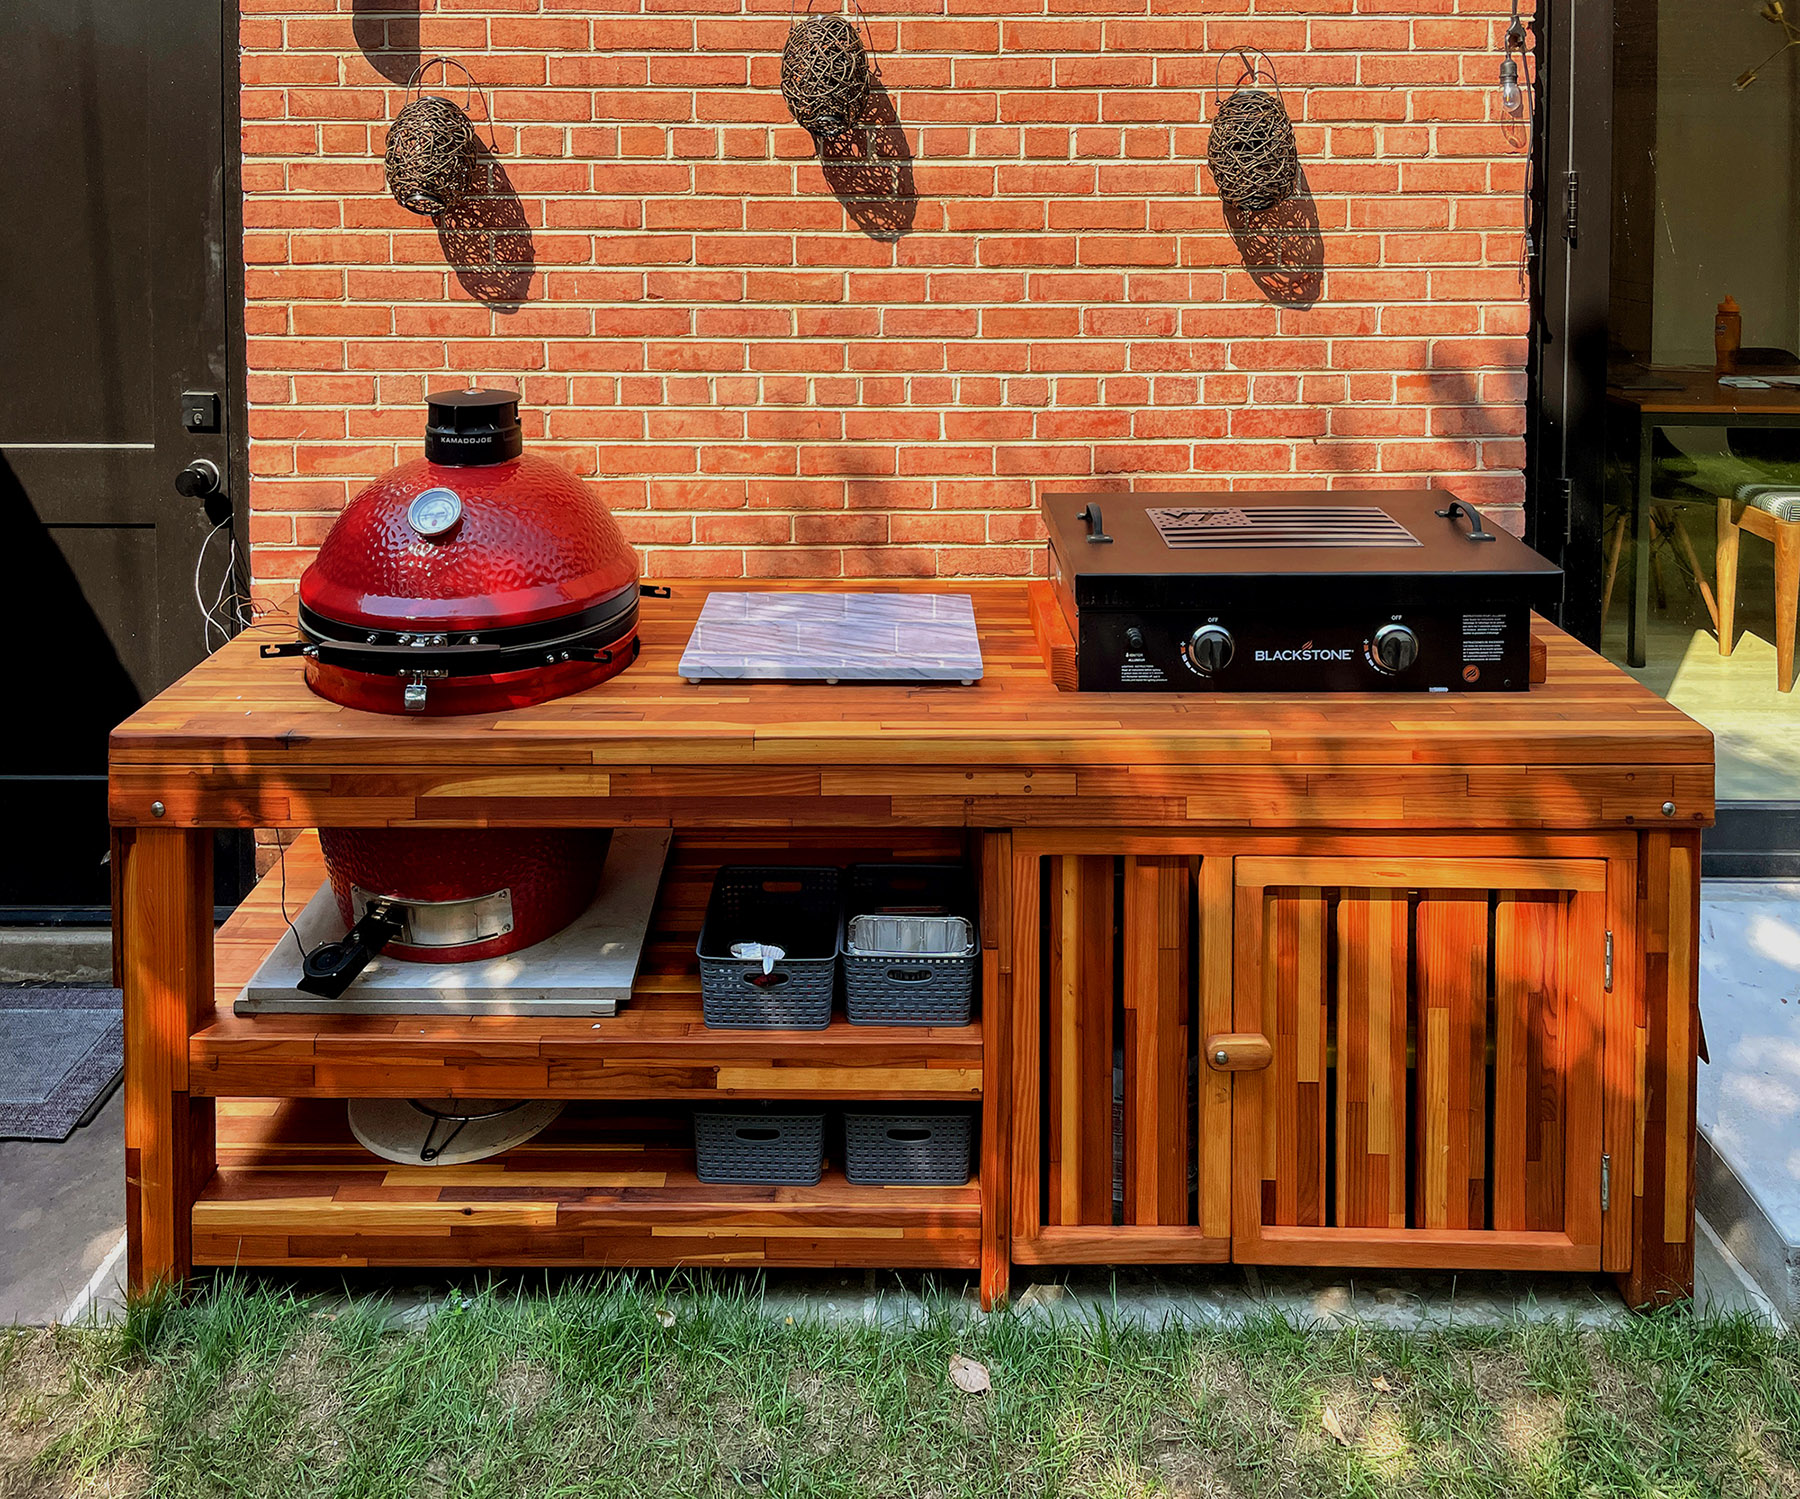 https://www.foreverredwood.com/image/catalog/product/outdoor-table-with-built-in-grill/a1499edb13879c435fa15dbb66a3dbc8c46f115d.jpeg